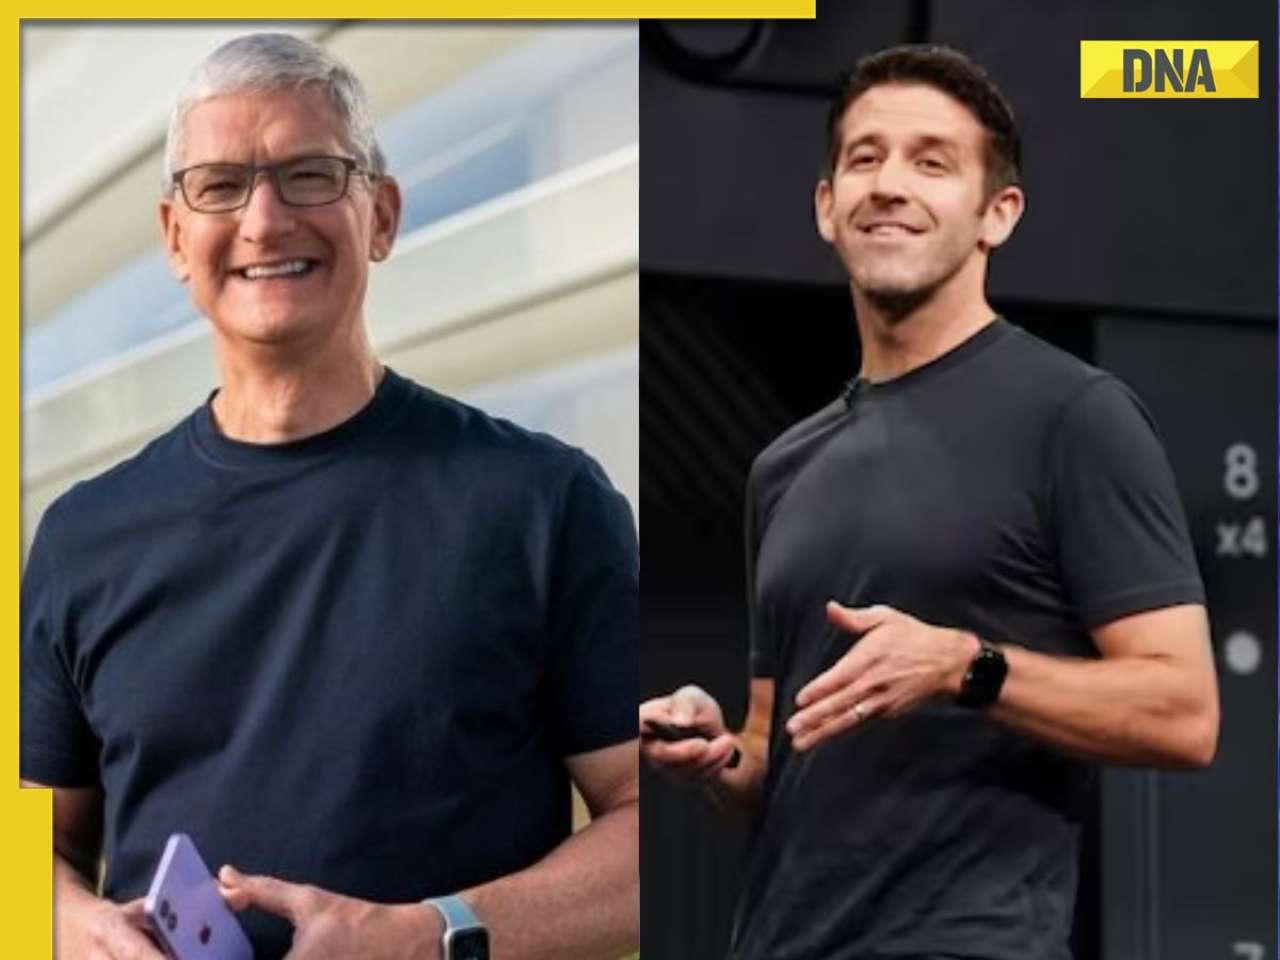 Meet man, who is likely to succeed Tim Cook as Apple CEO, he is from...